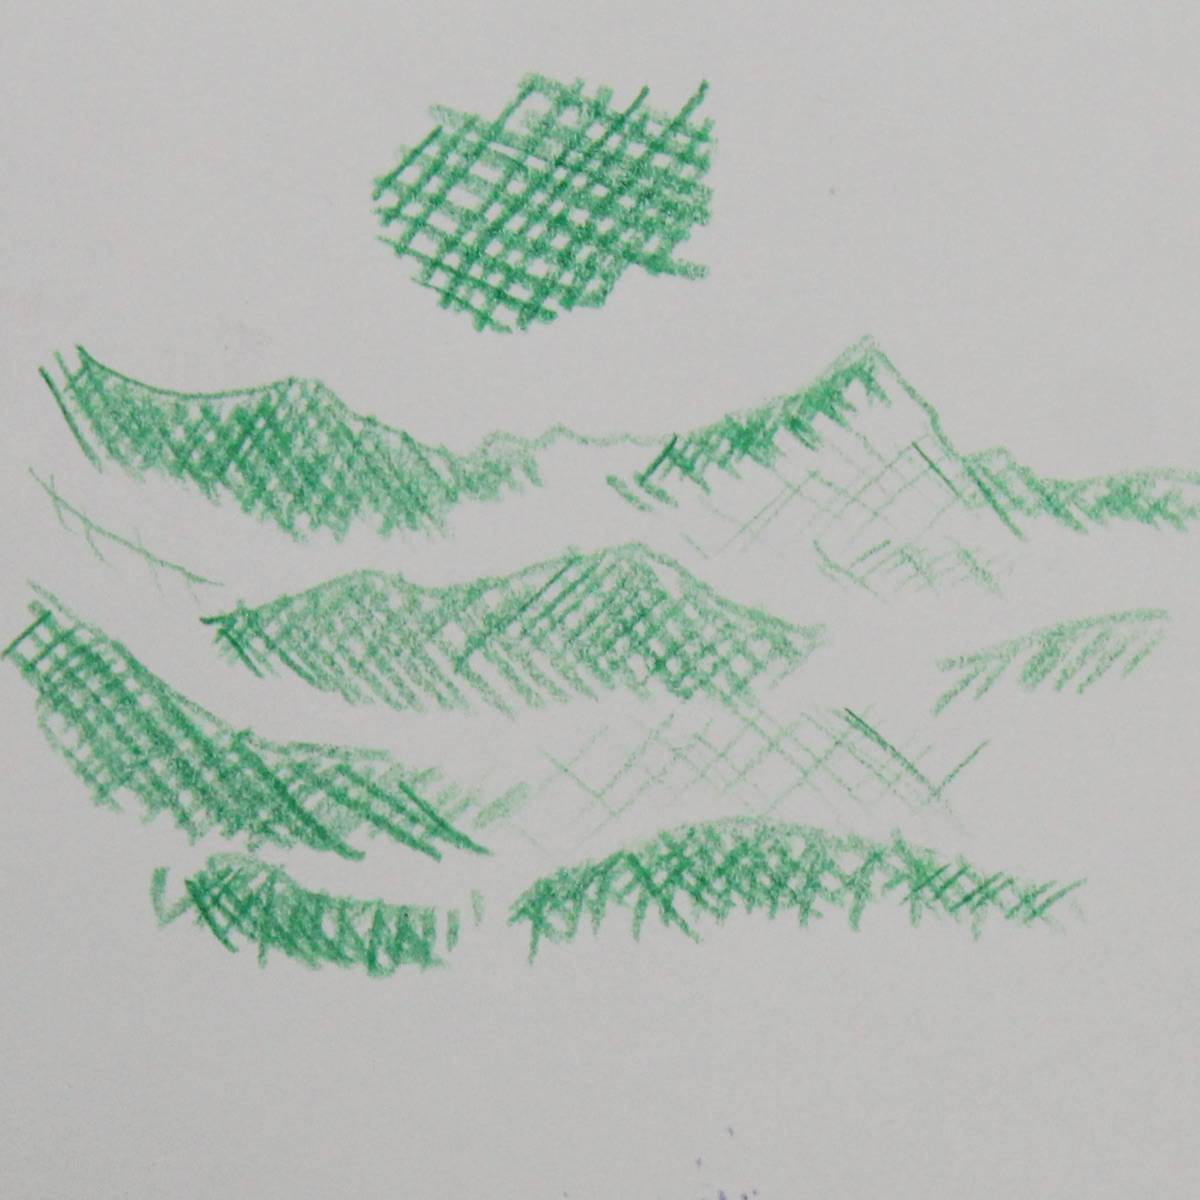 Green colored pencil crosshatching used to make a hilly landscape.